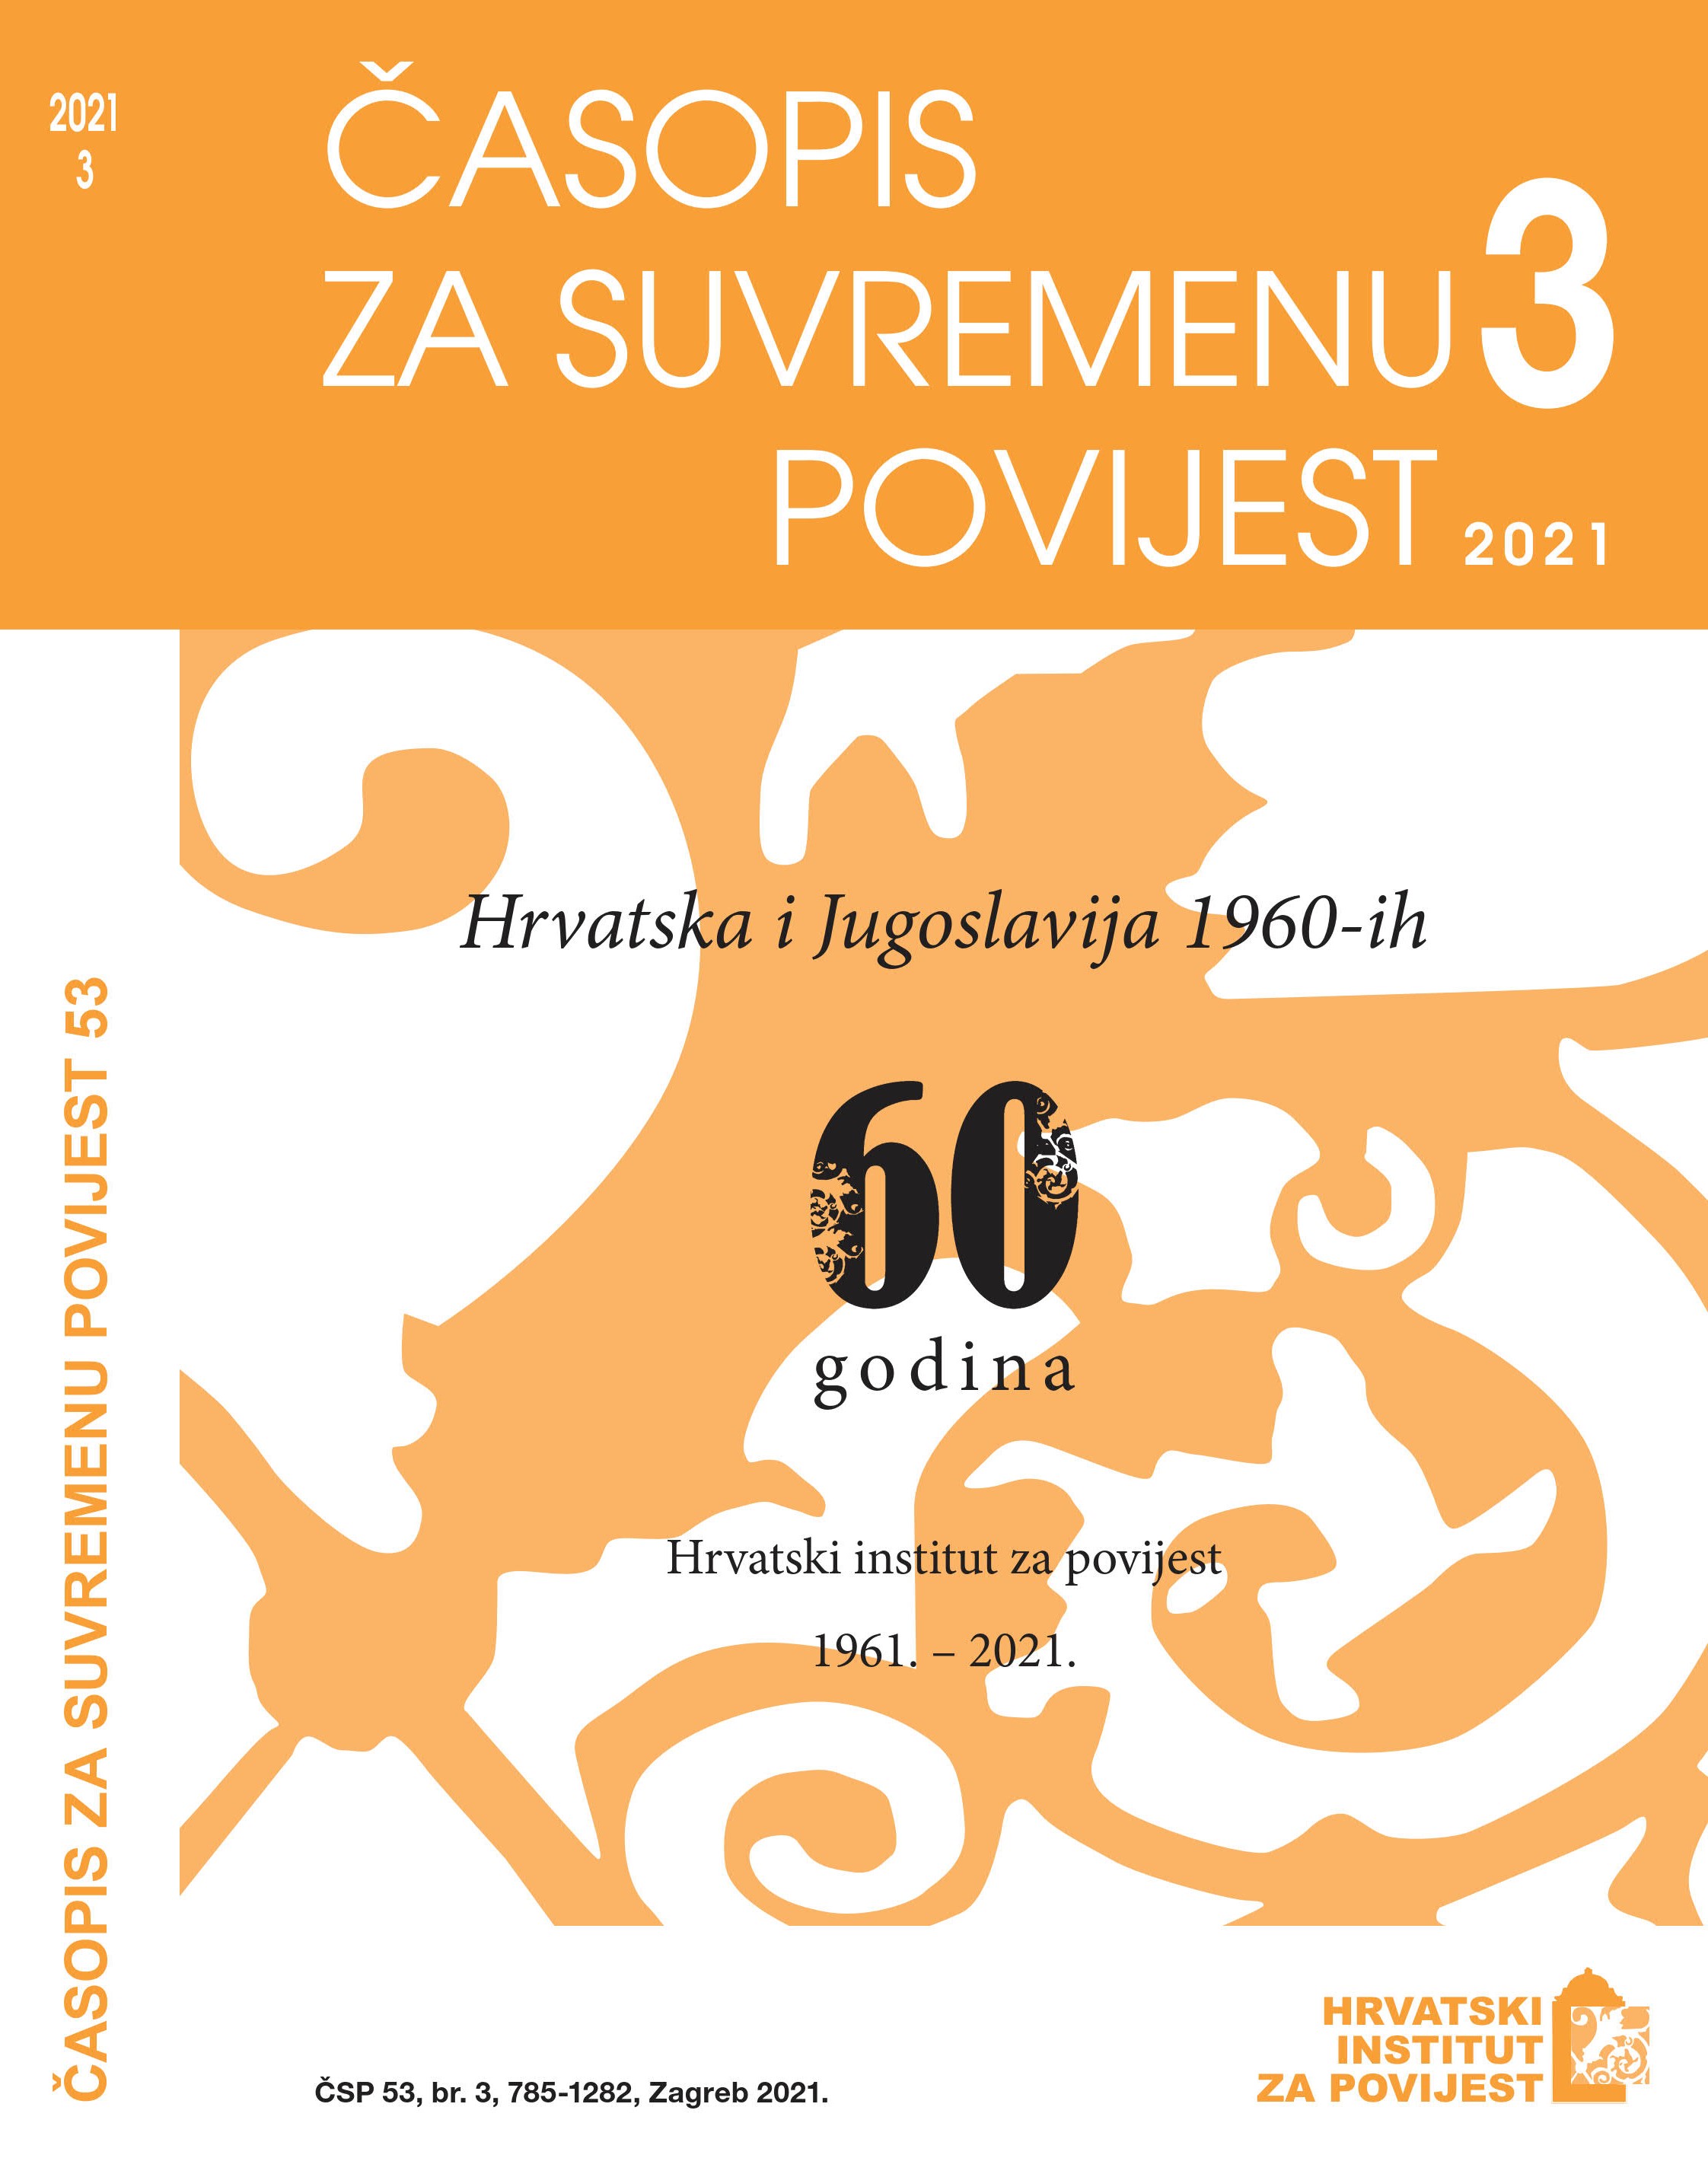 The Operational Measures of Communist Law Enforcement Authorities Towards the Catholic Church in Croatia from 1951 to 1965 Cover Image